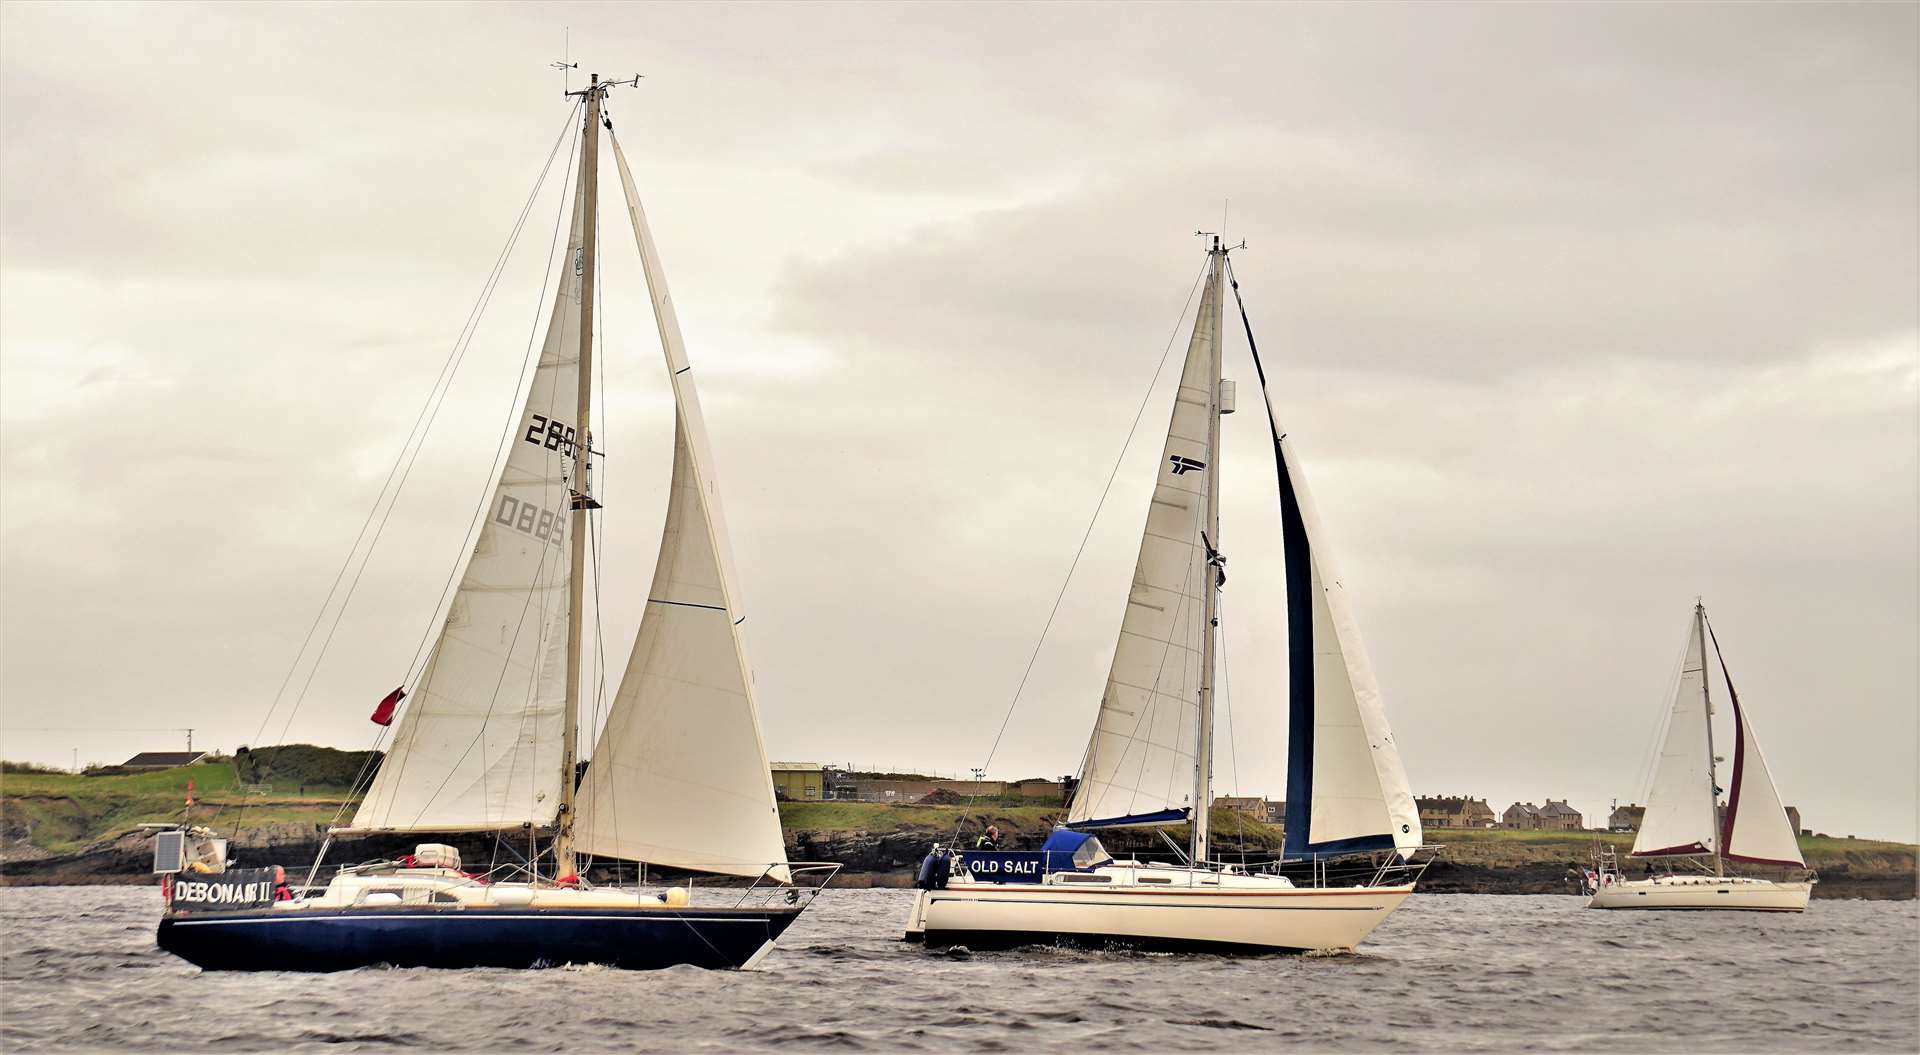 Debonair II, Old Salt and CD Venture race along the north side of the bay. Picture: DGS